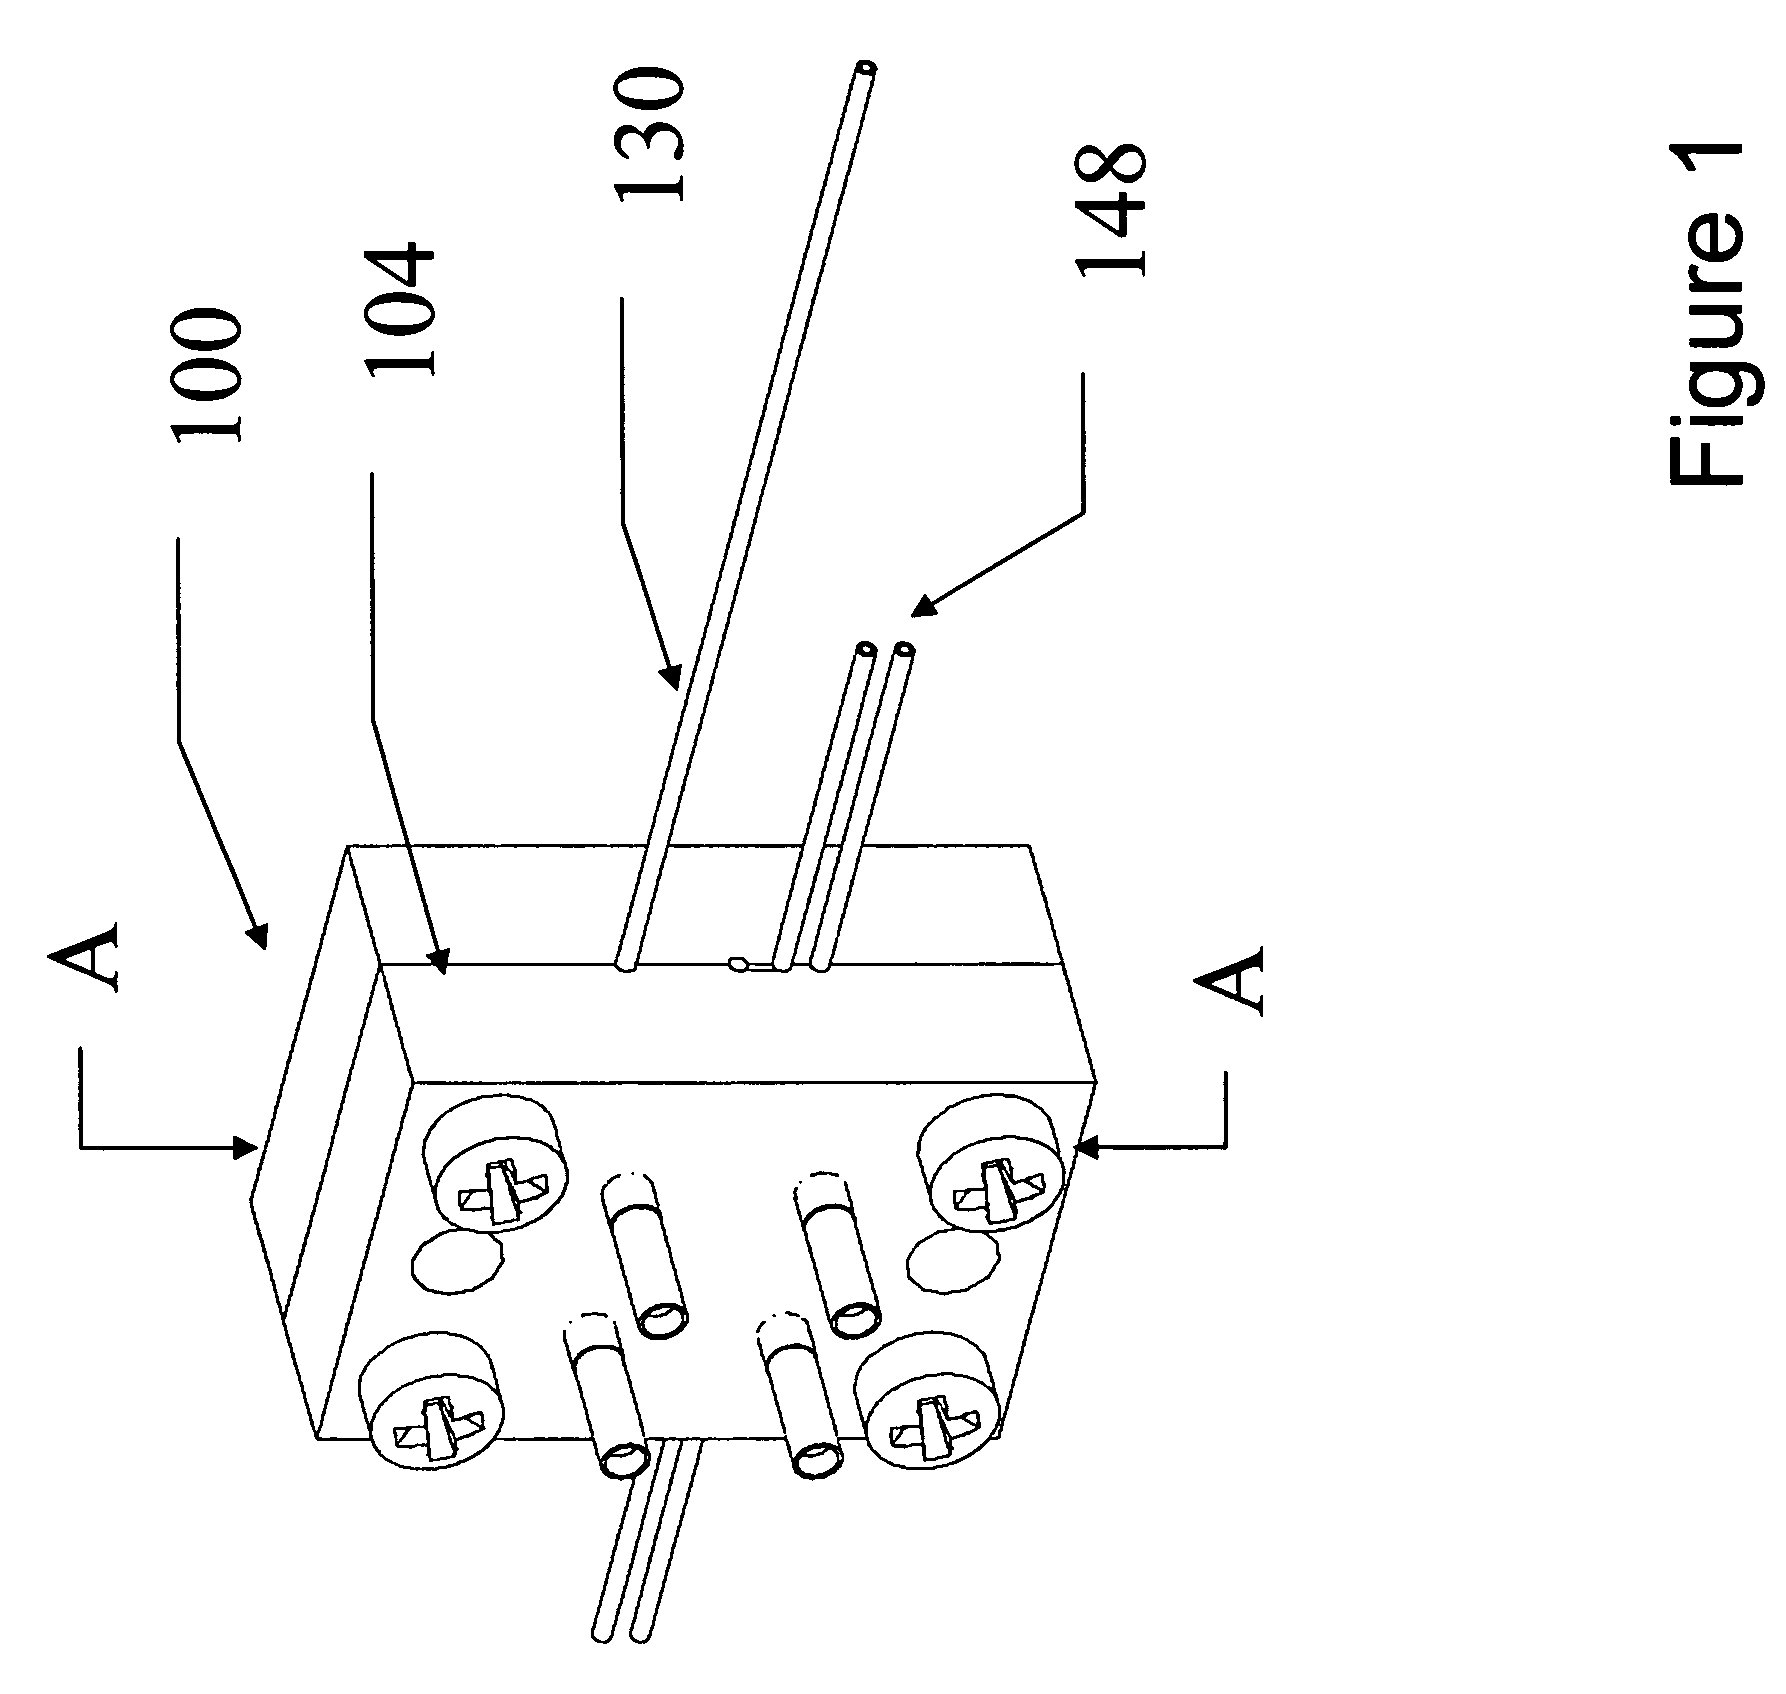 High pressure capillary micro-fluidic valve device and a method of fabricating same